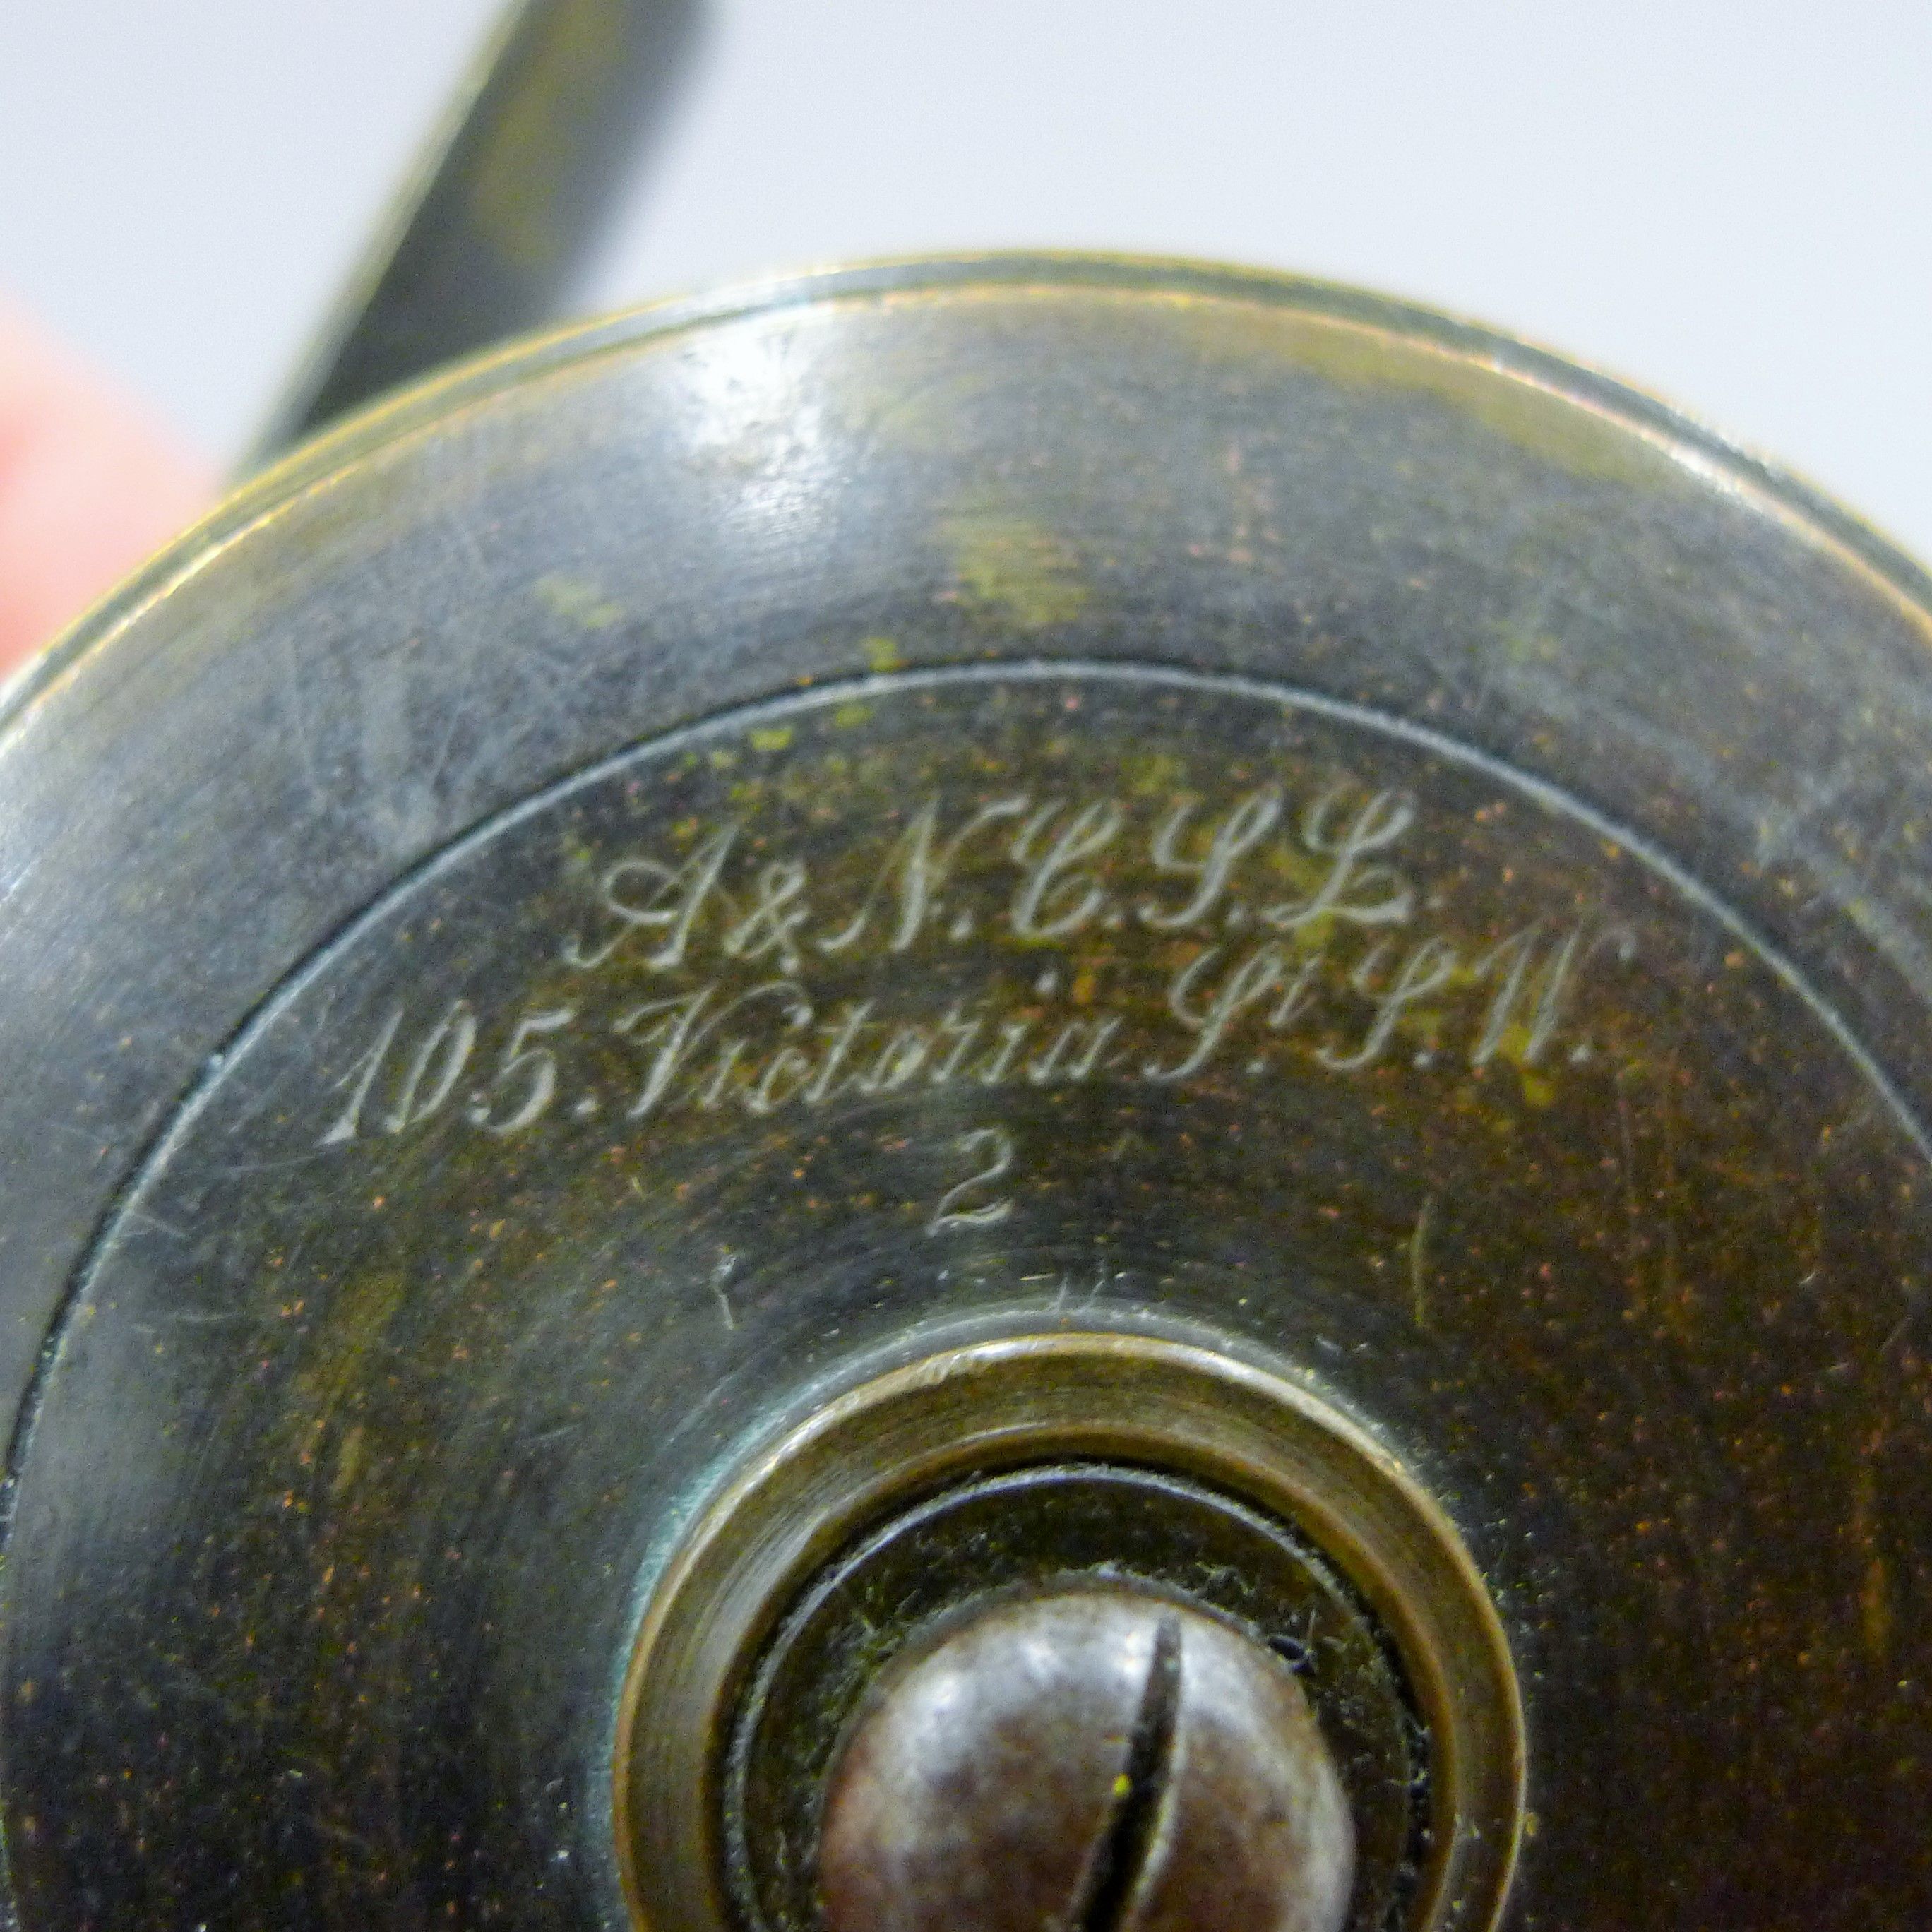 An Army and Navy 2 1/4" brass trout fly reel engraved "105 Victoria Street, SW". - Image 3 of 3